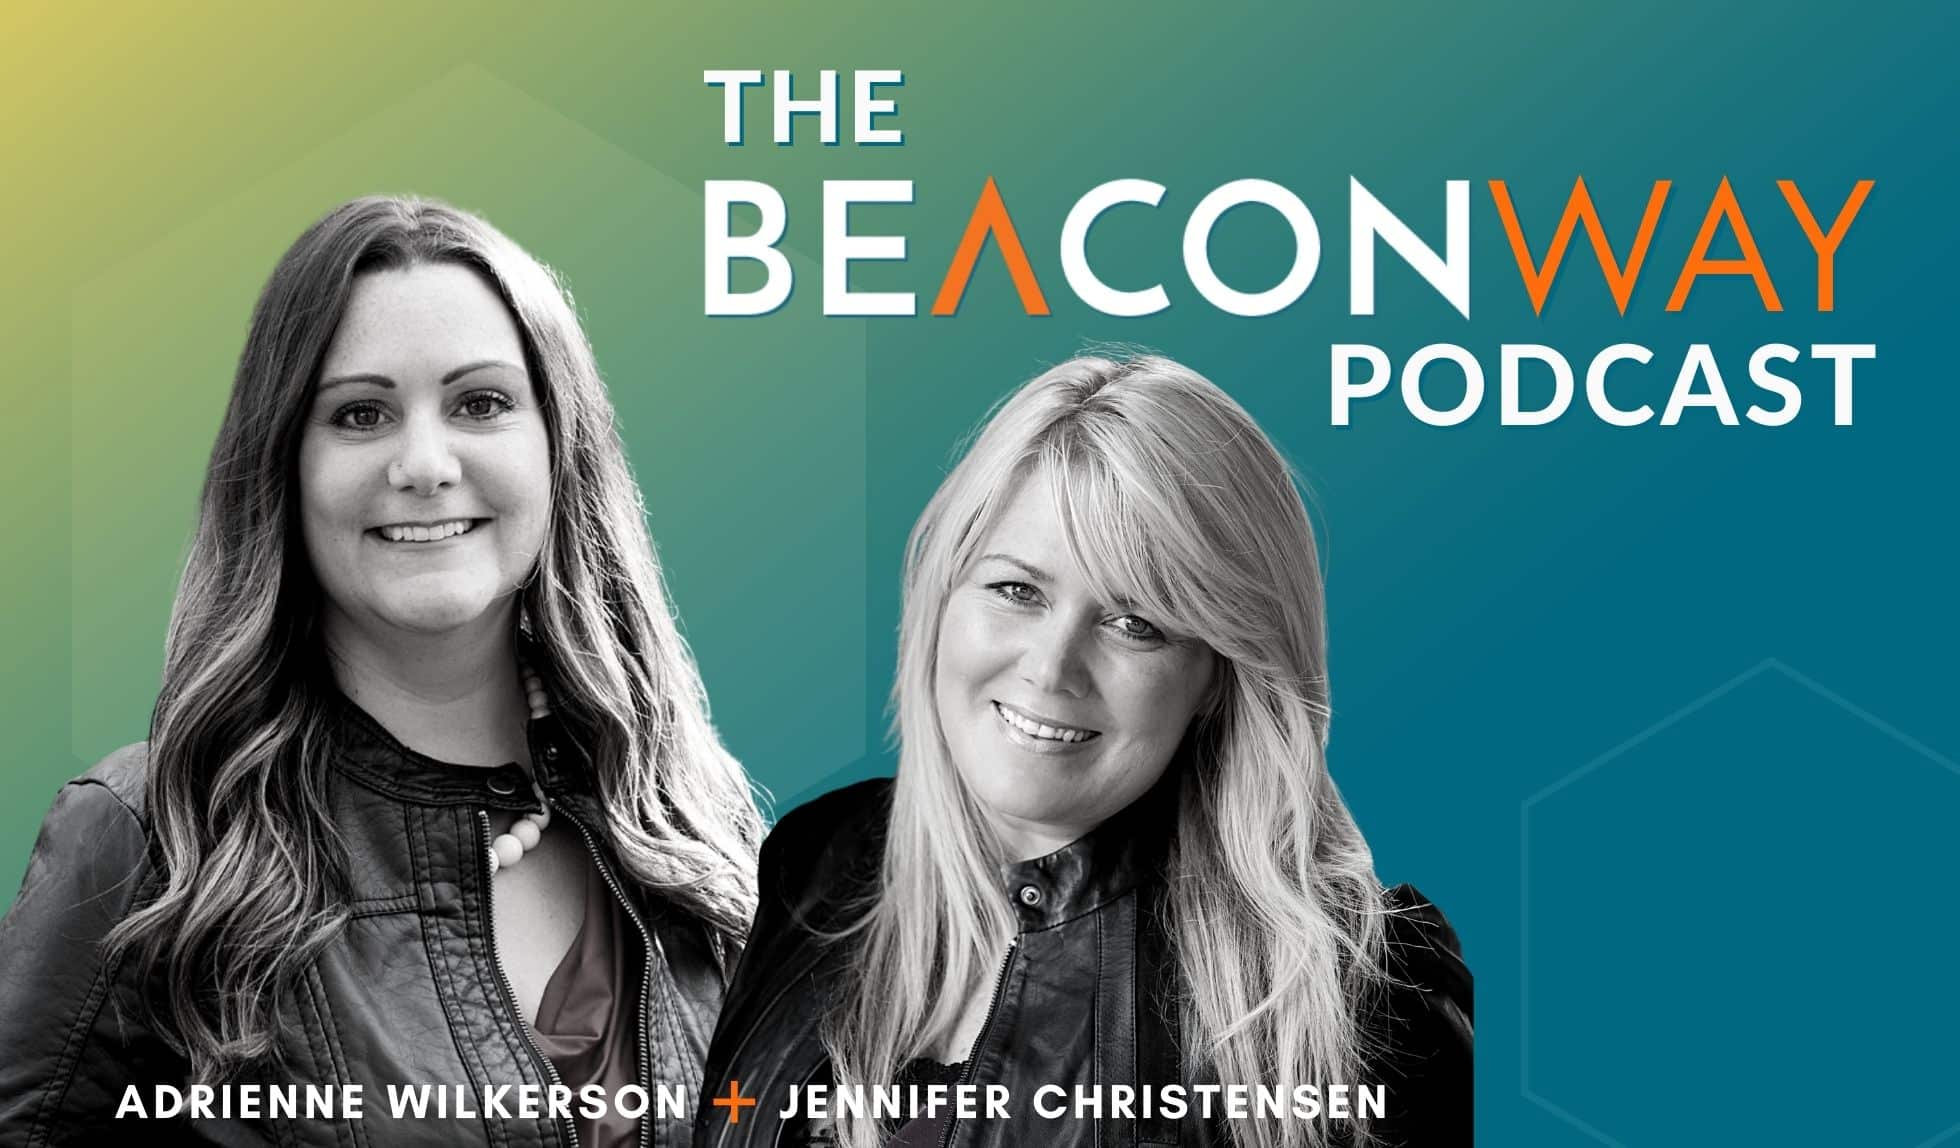 The Beacon Way podcast with Adrienne Wilkerson and Jennifer Christensen